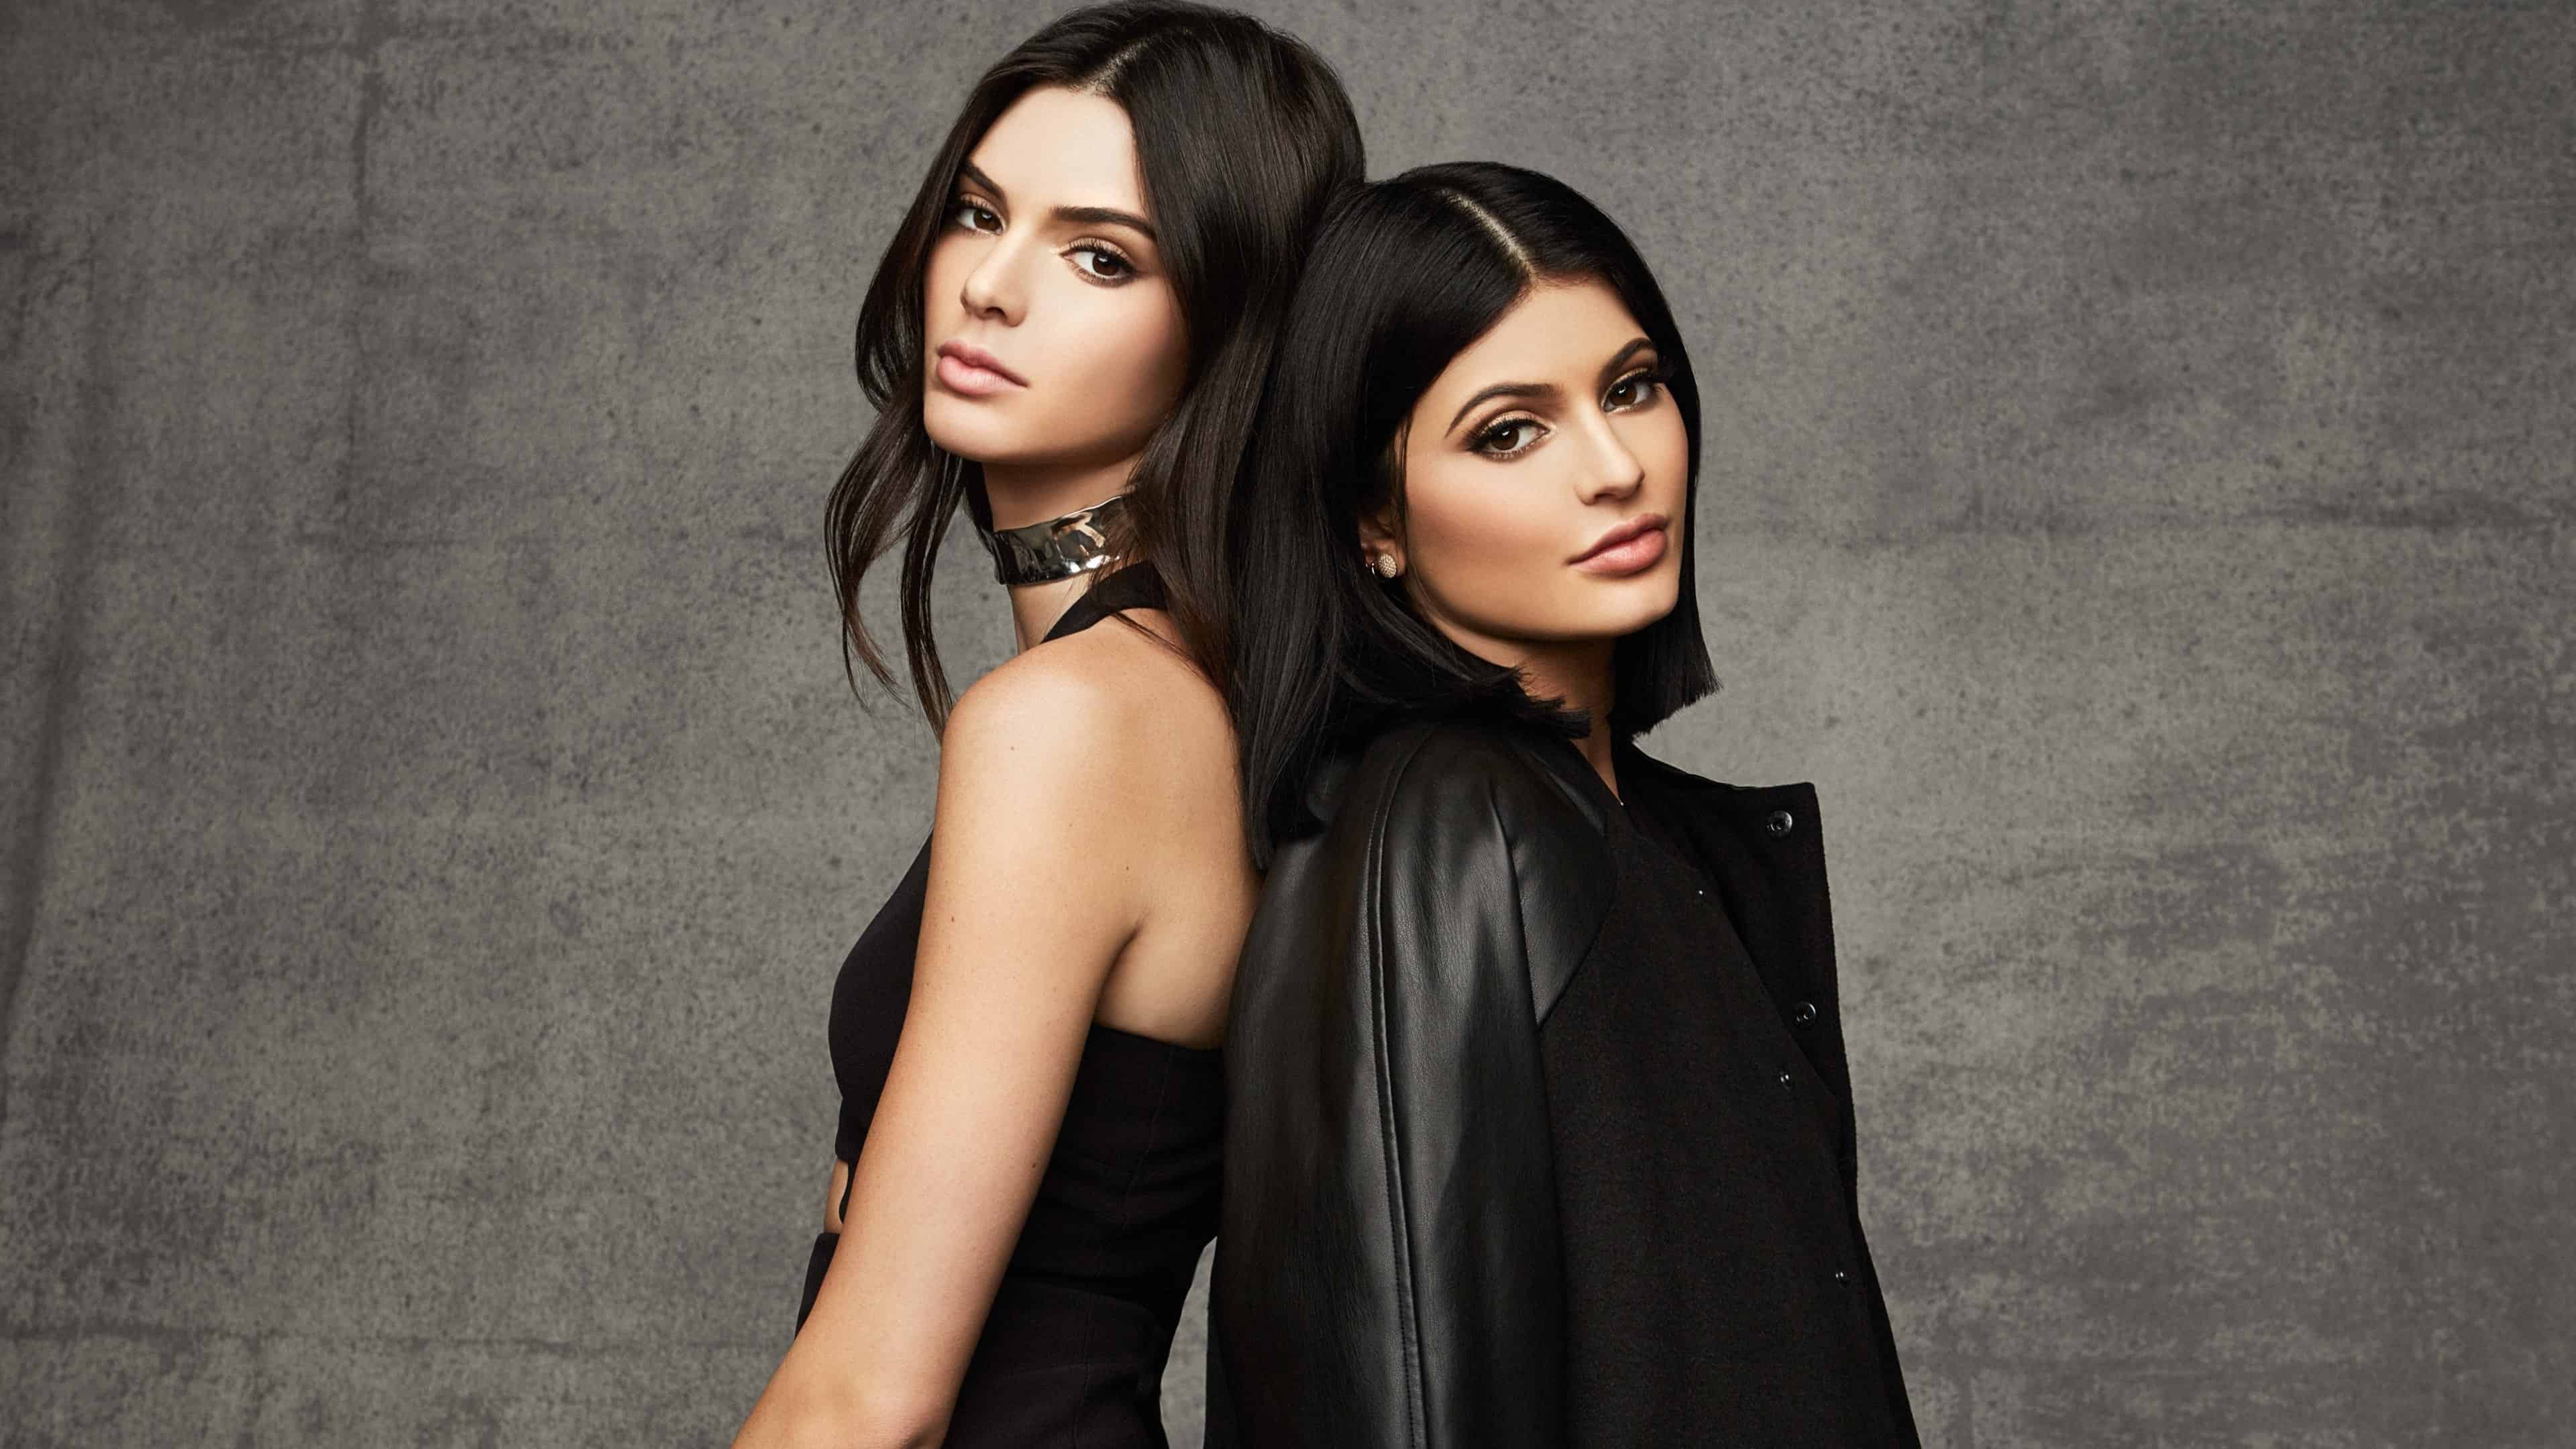 Kylie Jenner And Kendall UHD 4k Wallpaper